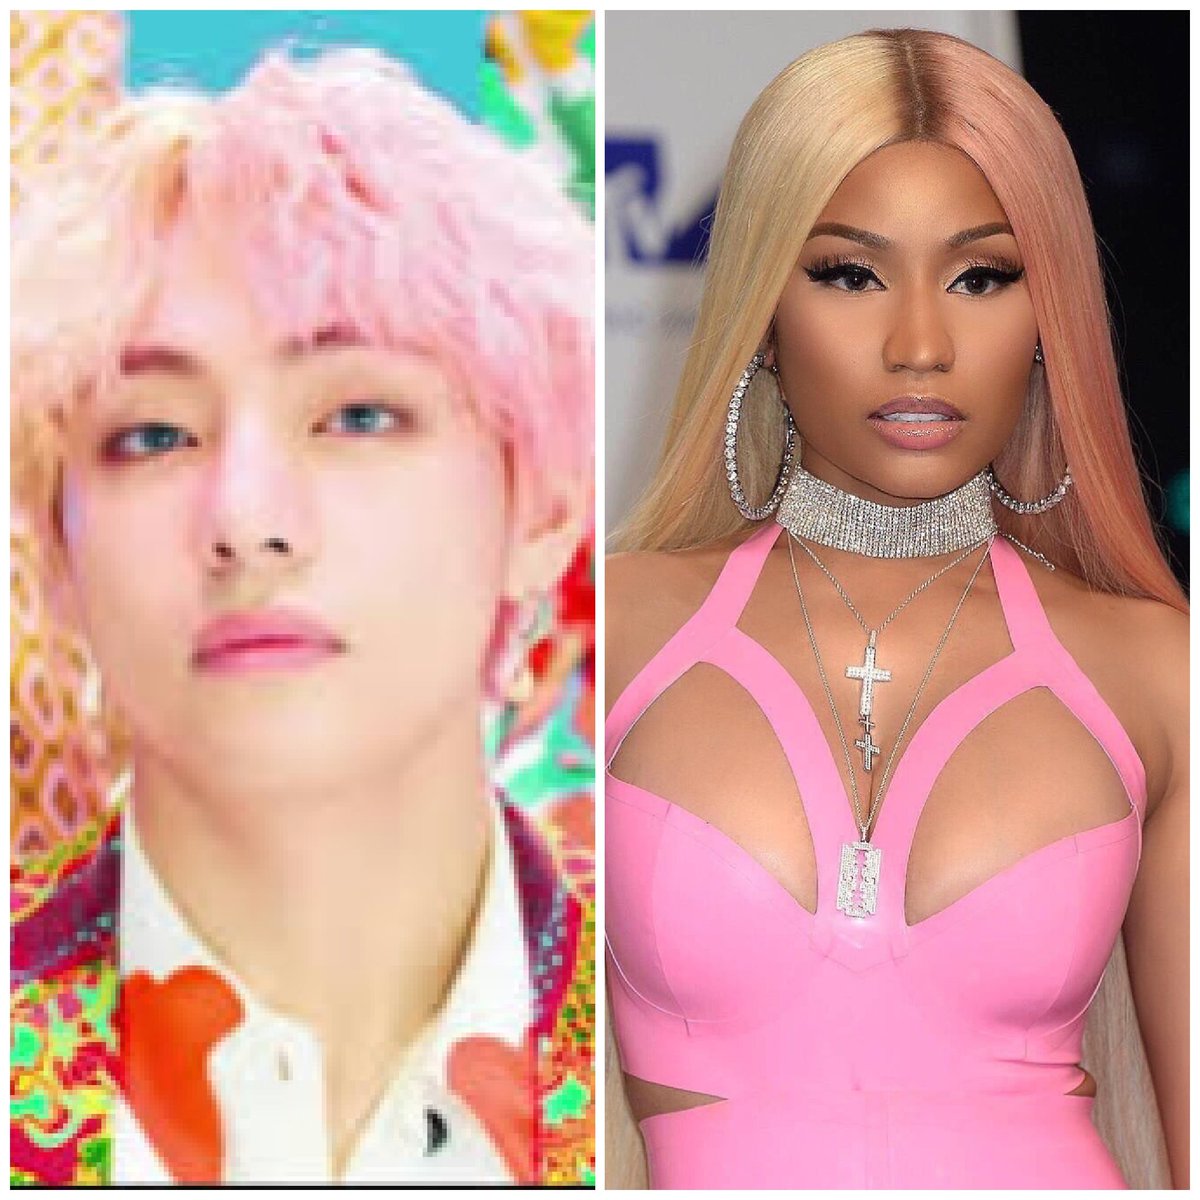 More proof that BTS and Nicki look amazing together!! They really see each other!!